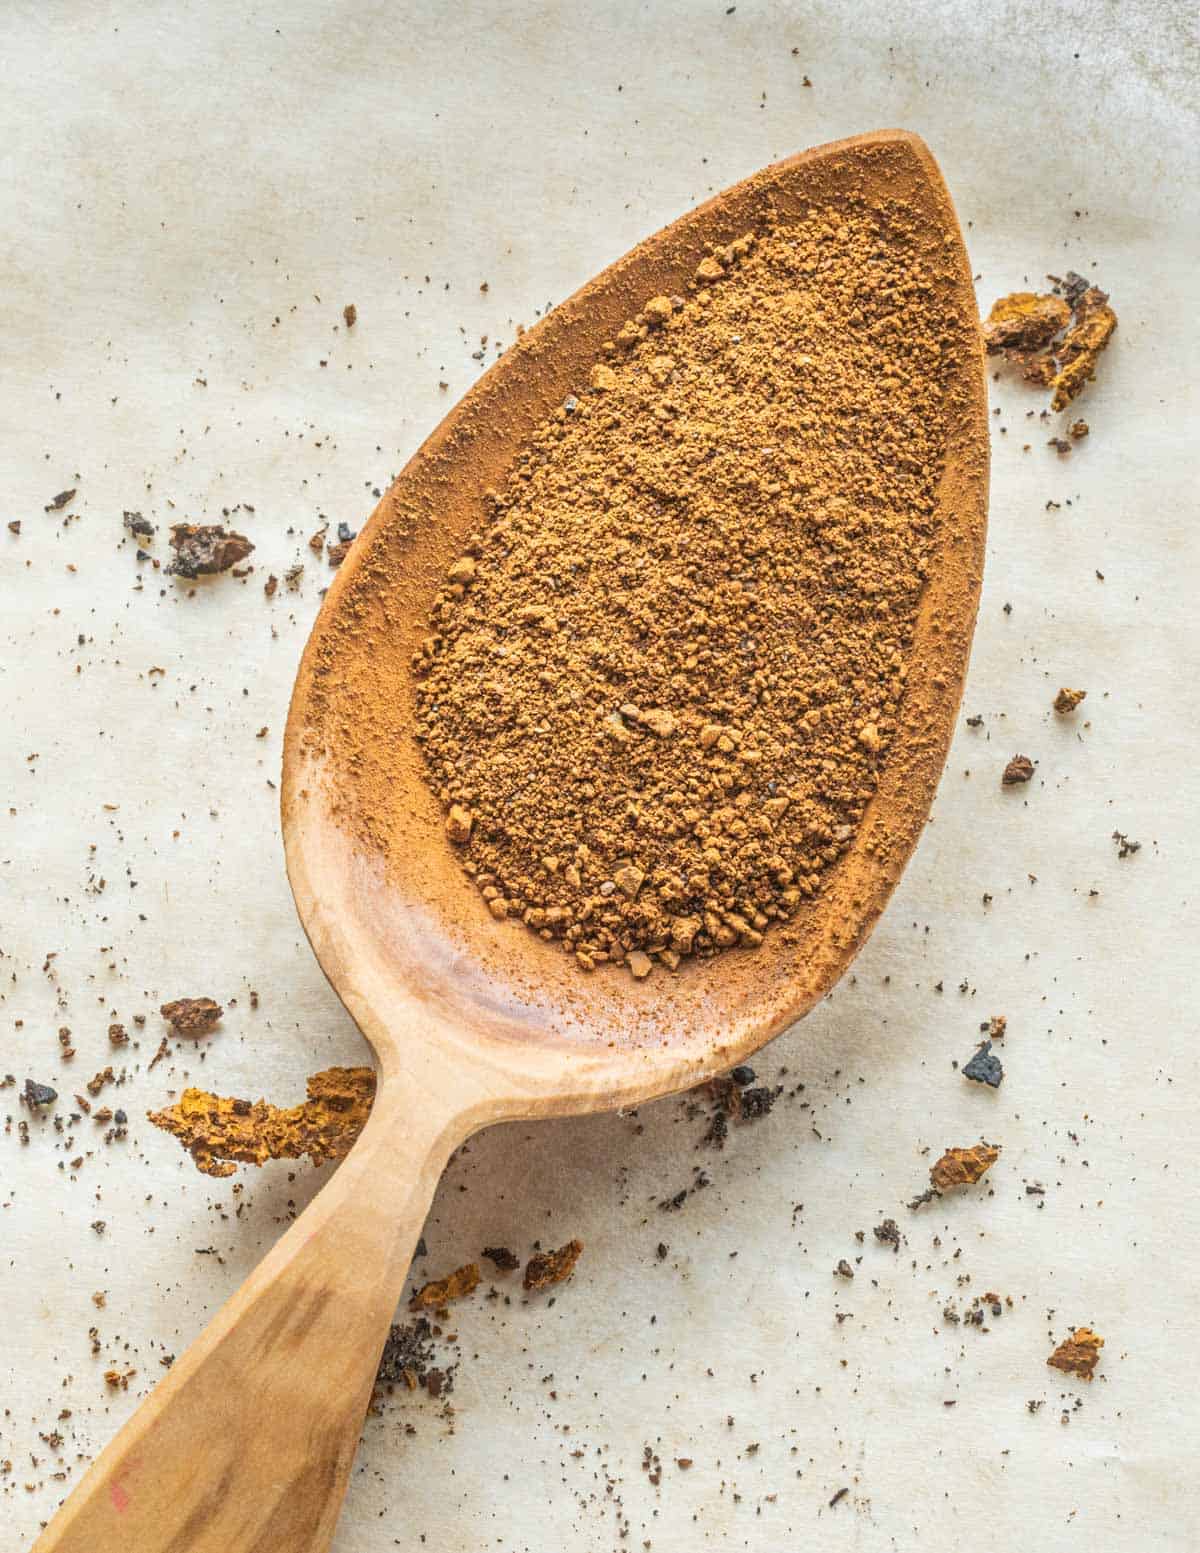 A spoon made from apple wood filled with ground chaga mushroom powder.